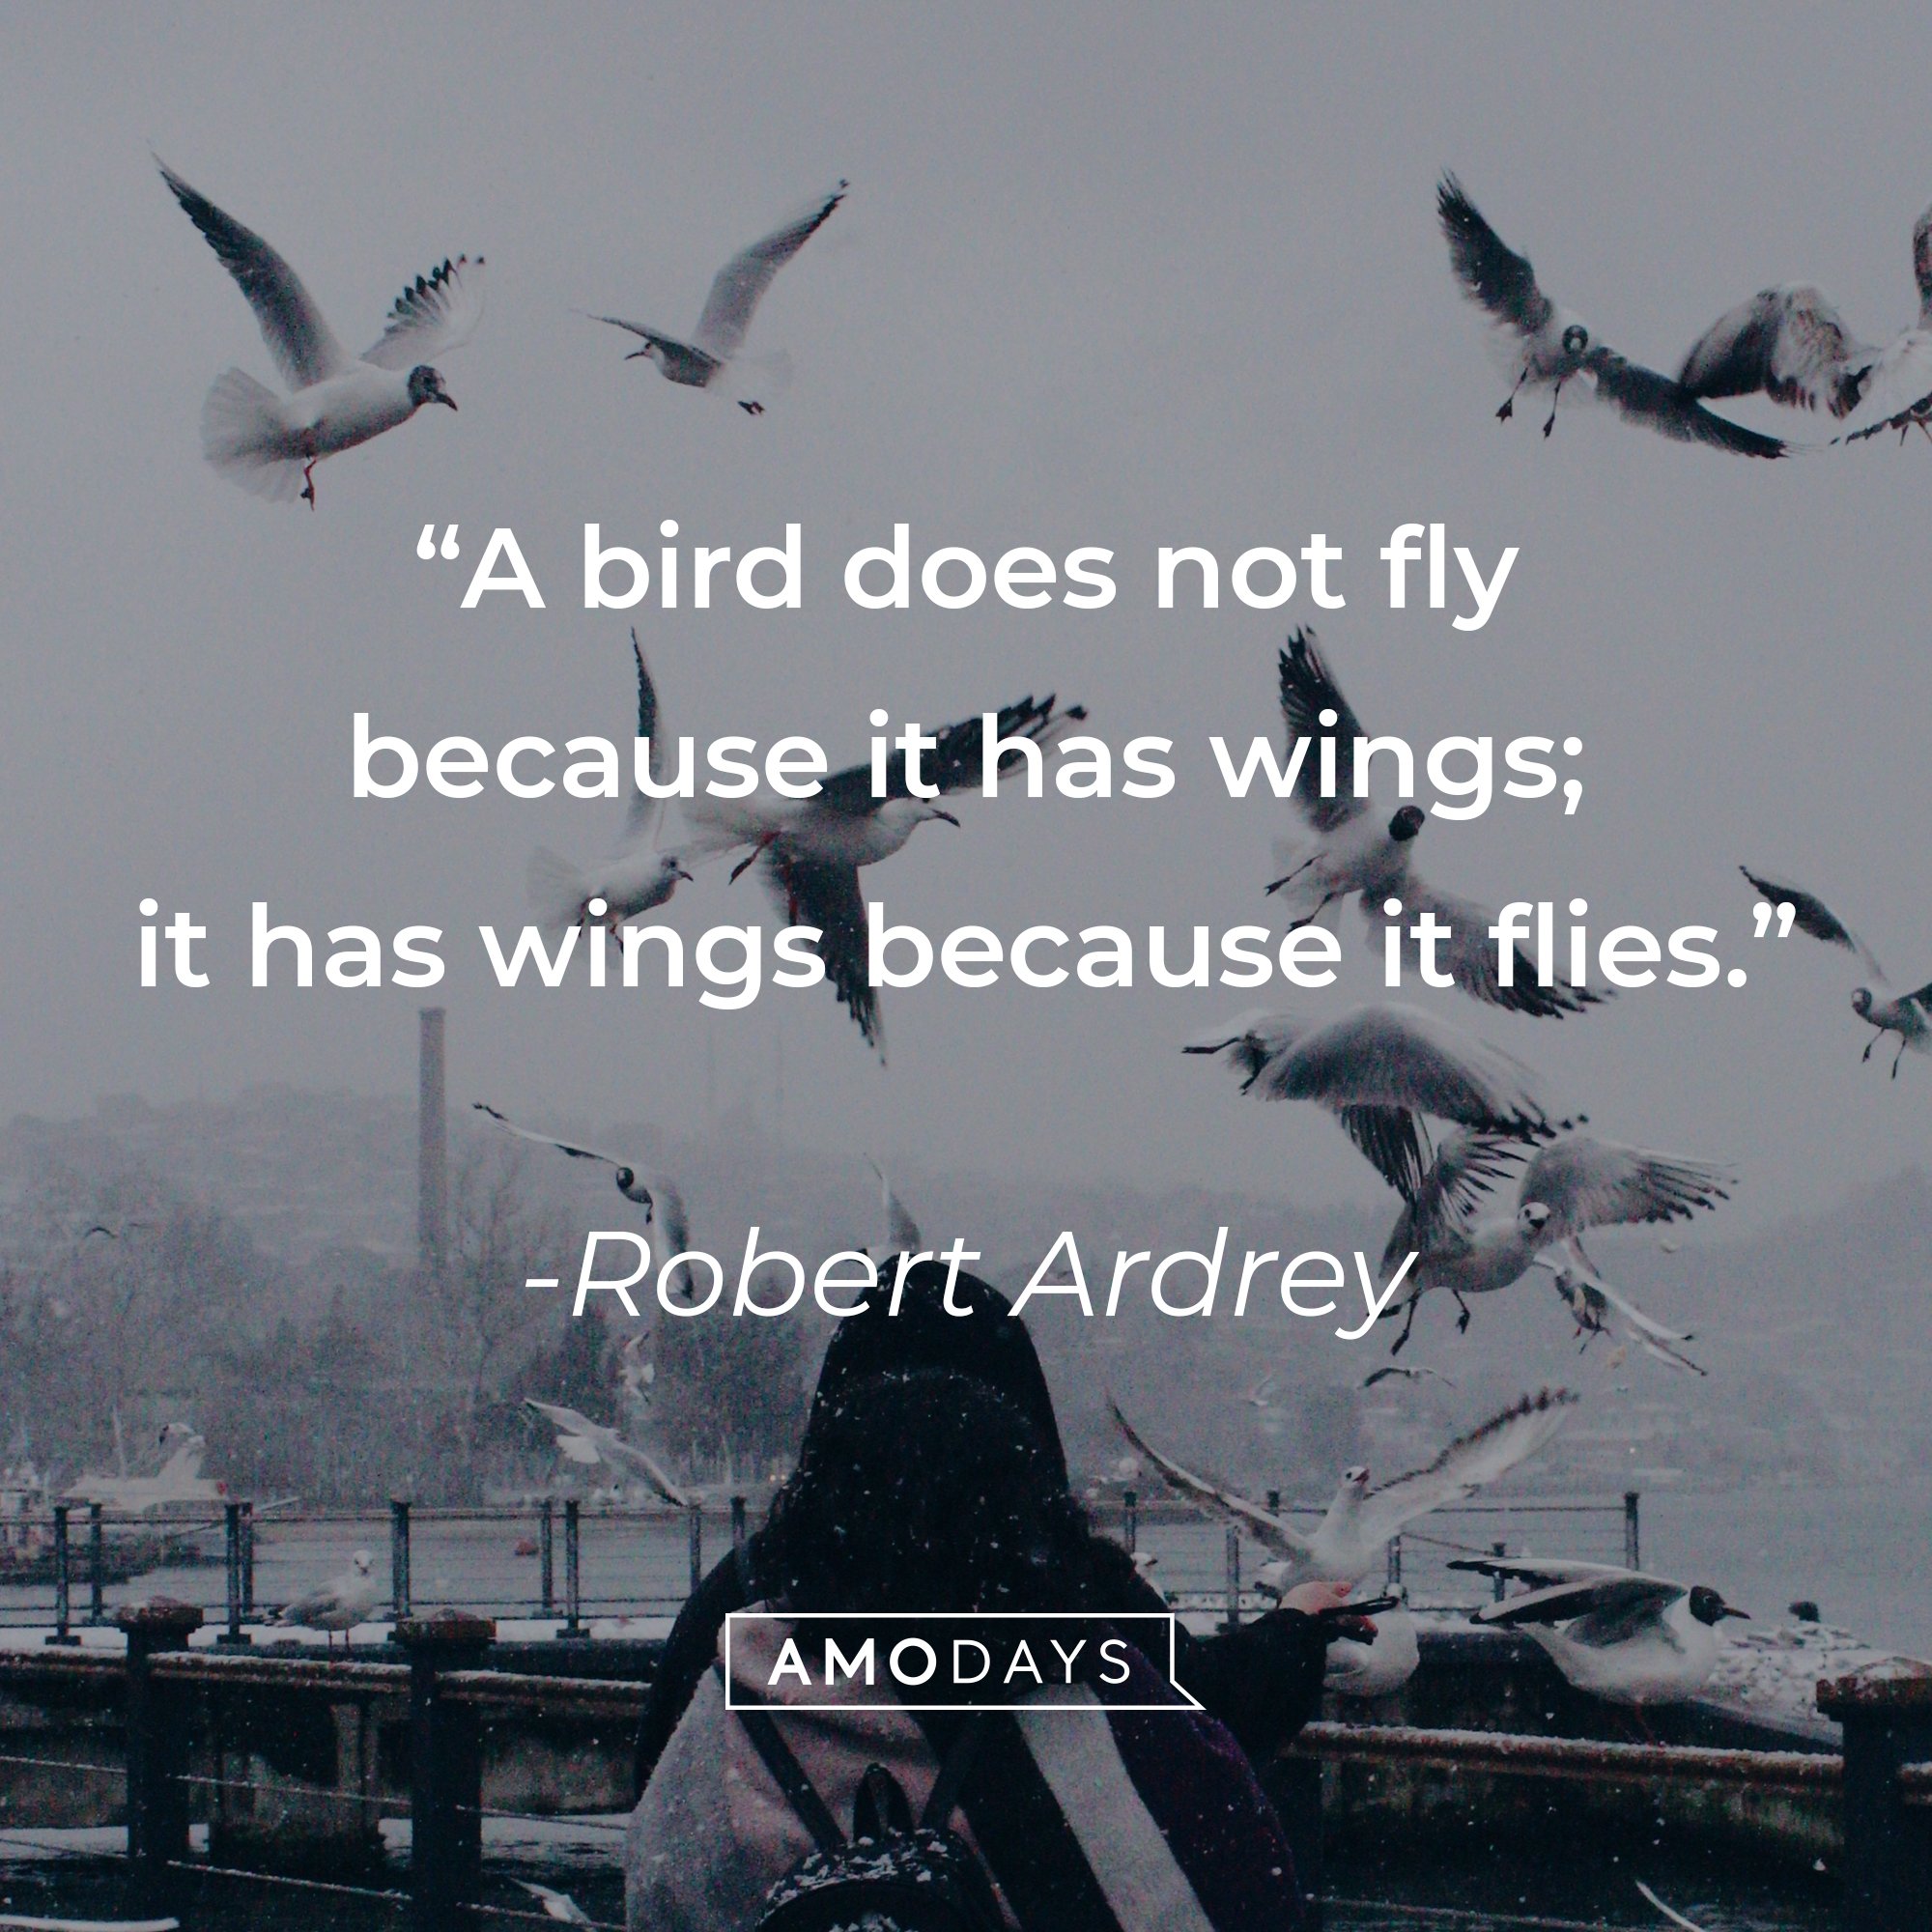 Robert Ardrey's quote: "A bird does not fly because it has wings; it has wings because it flies." | Image: AmoDays